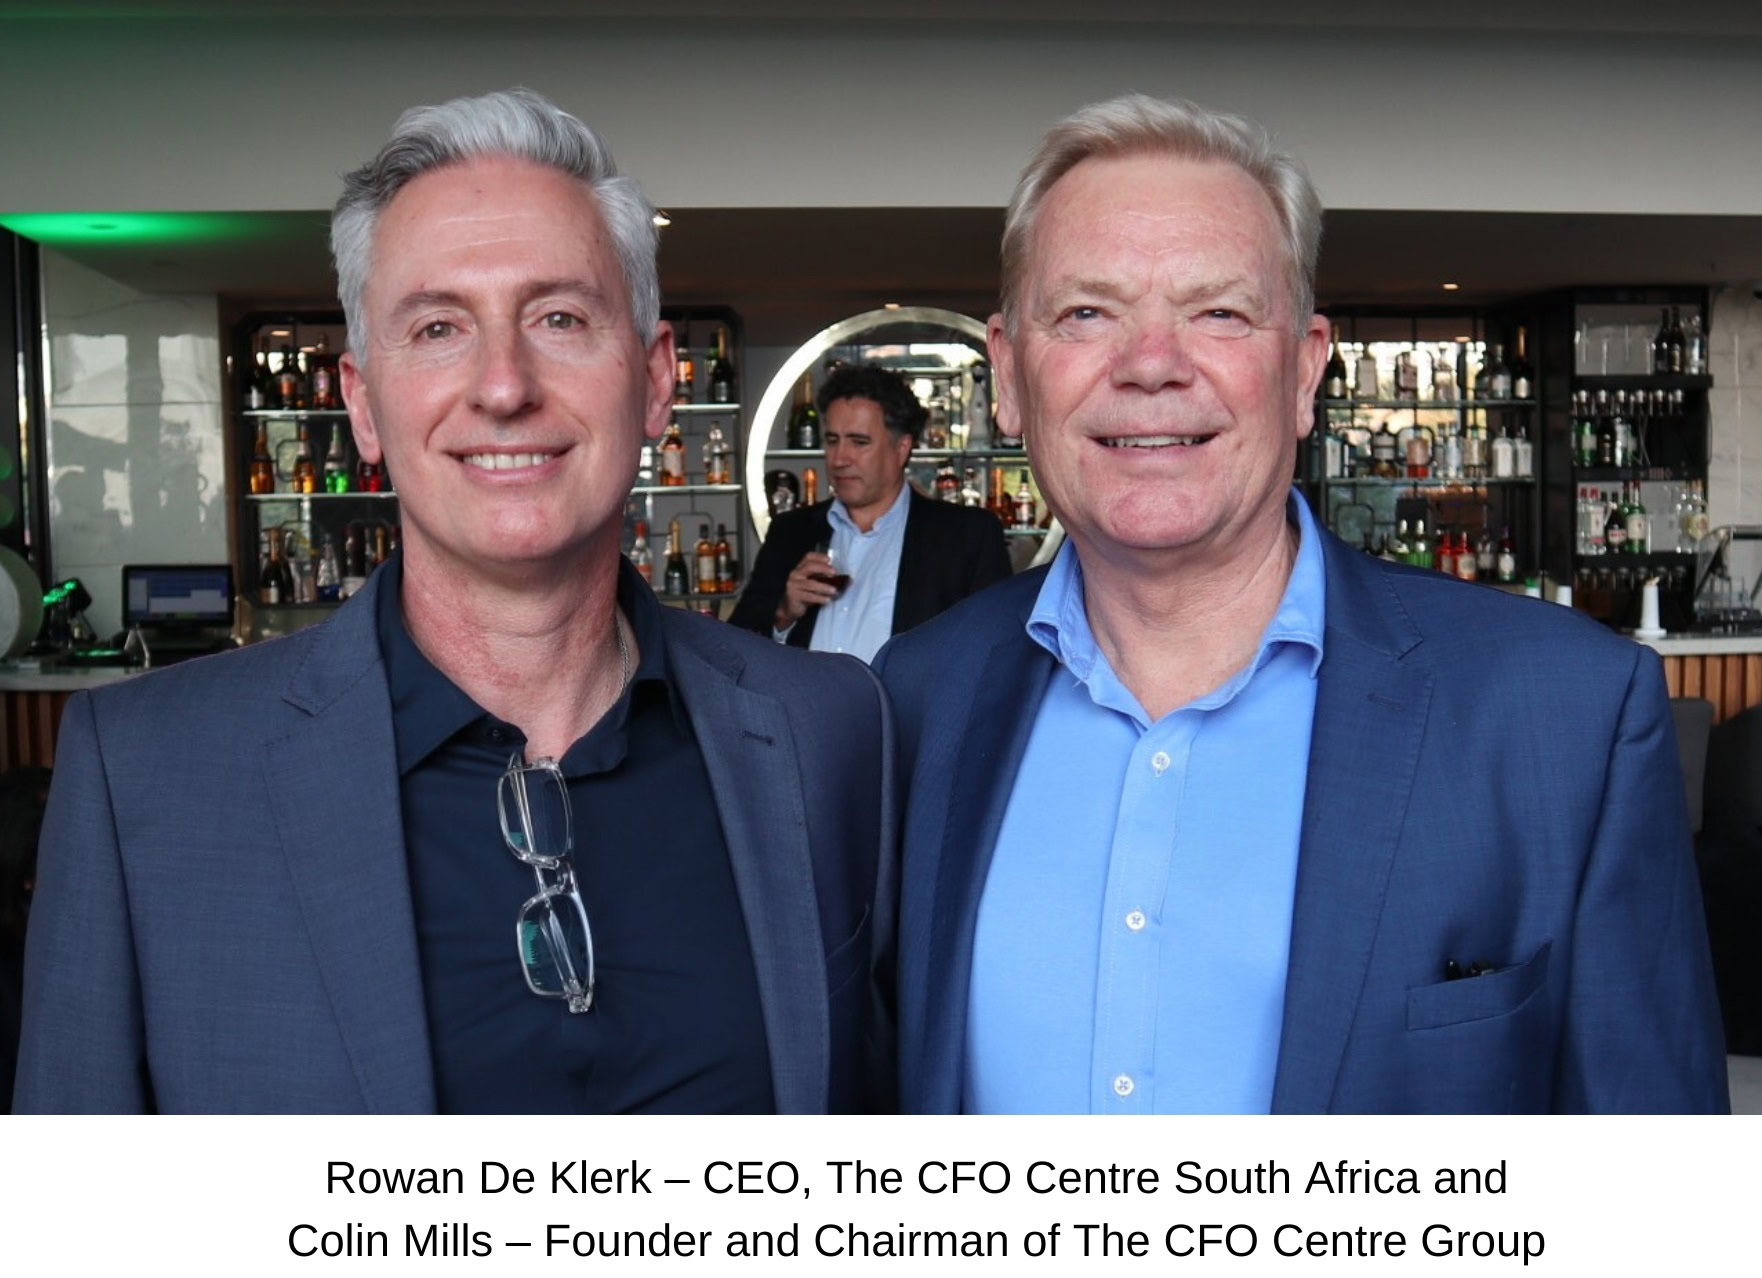 A picture of Rowan De Klerk, CEO of The CFO Centre South Africa and Colin Mills, Founder and Chairman of The CFO Centre Group.